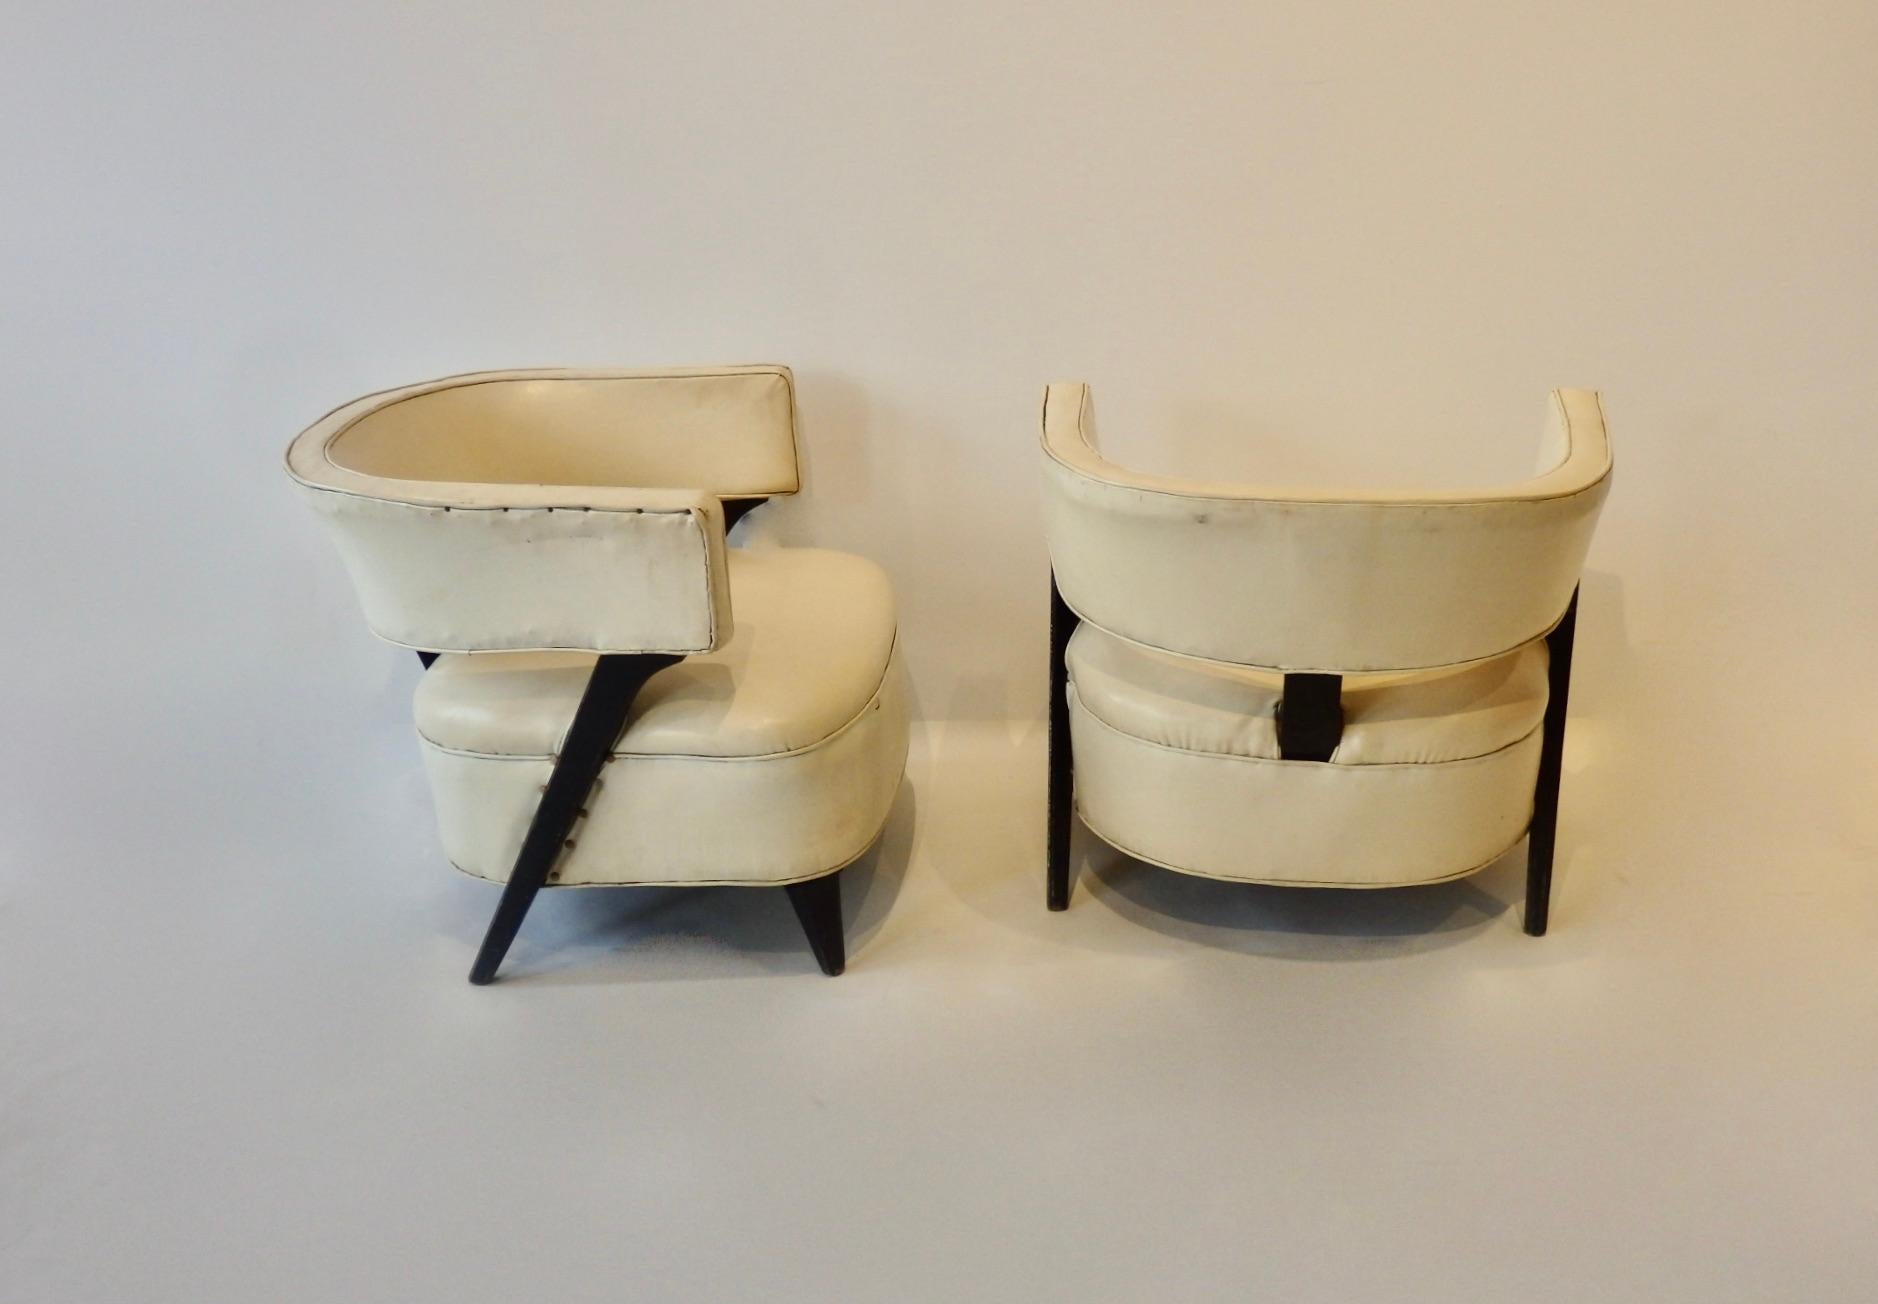 American Pair of as Found Paul Laszlo Style Art Deco Moderne Club or Lounge Chairs